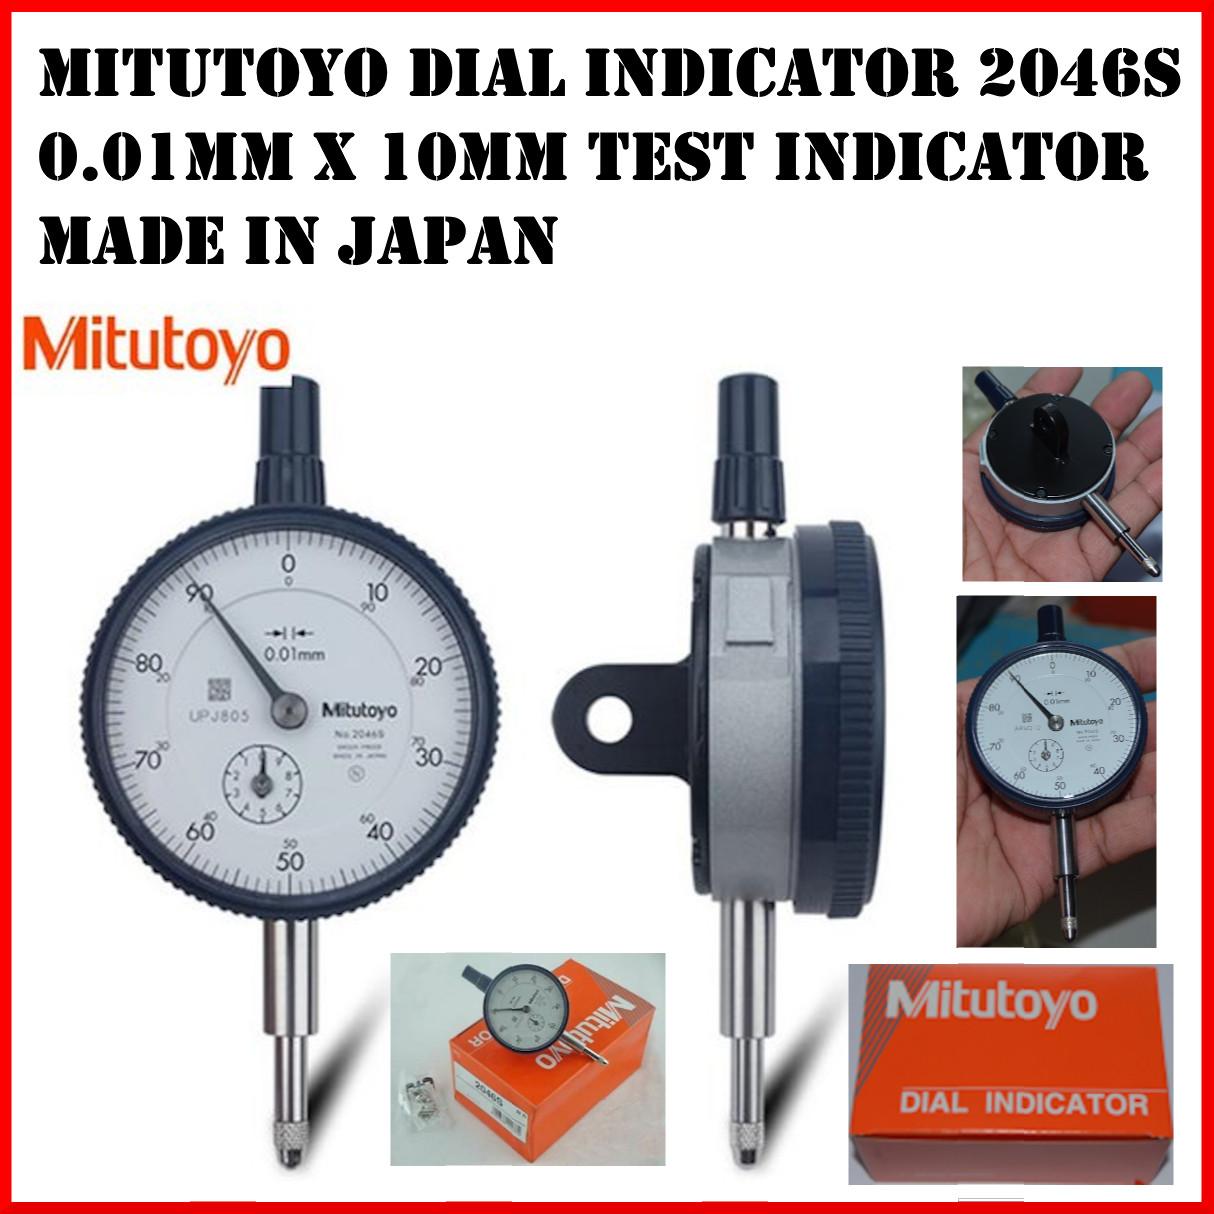 0//0mm-6//150mm Range Stainless Steel Solar Powered Mitutoyo 500-474 Digital Calipers for Inside Inch//Metric 0.0005//0.01mm Resolution Outside and Step Measurements Plus //-0.001//0.01mm Accuracy